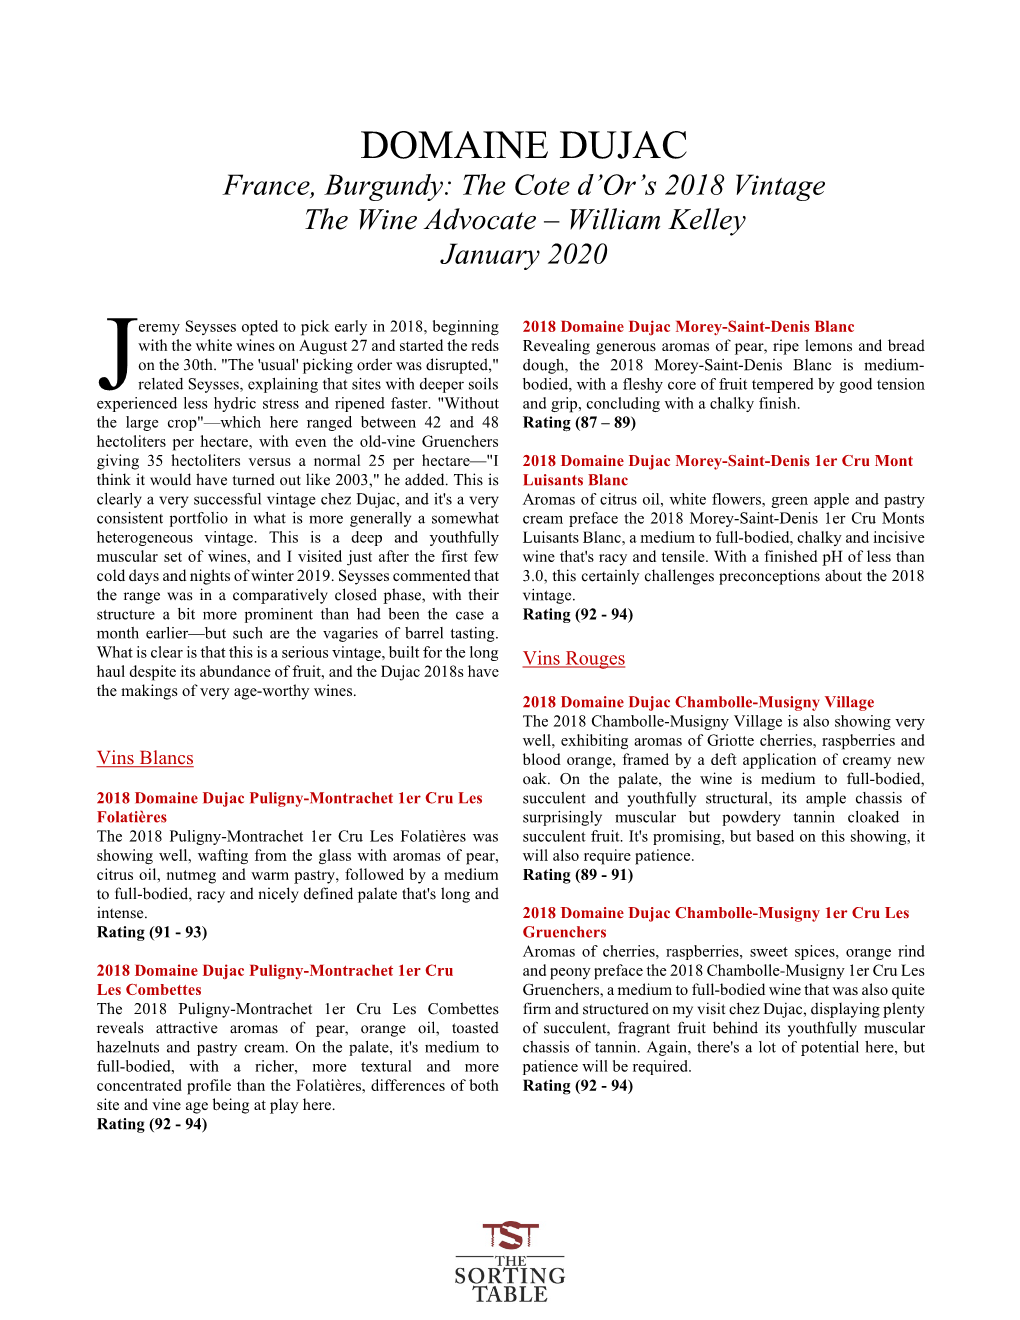 DOMAINE DUJAC France, Burgundy: the Cote D’Or’S 2018 Vintage the Wine Advocate – William Kelley January 2020